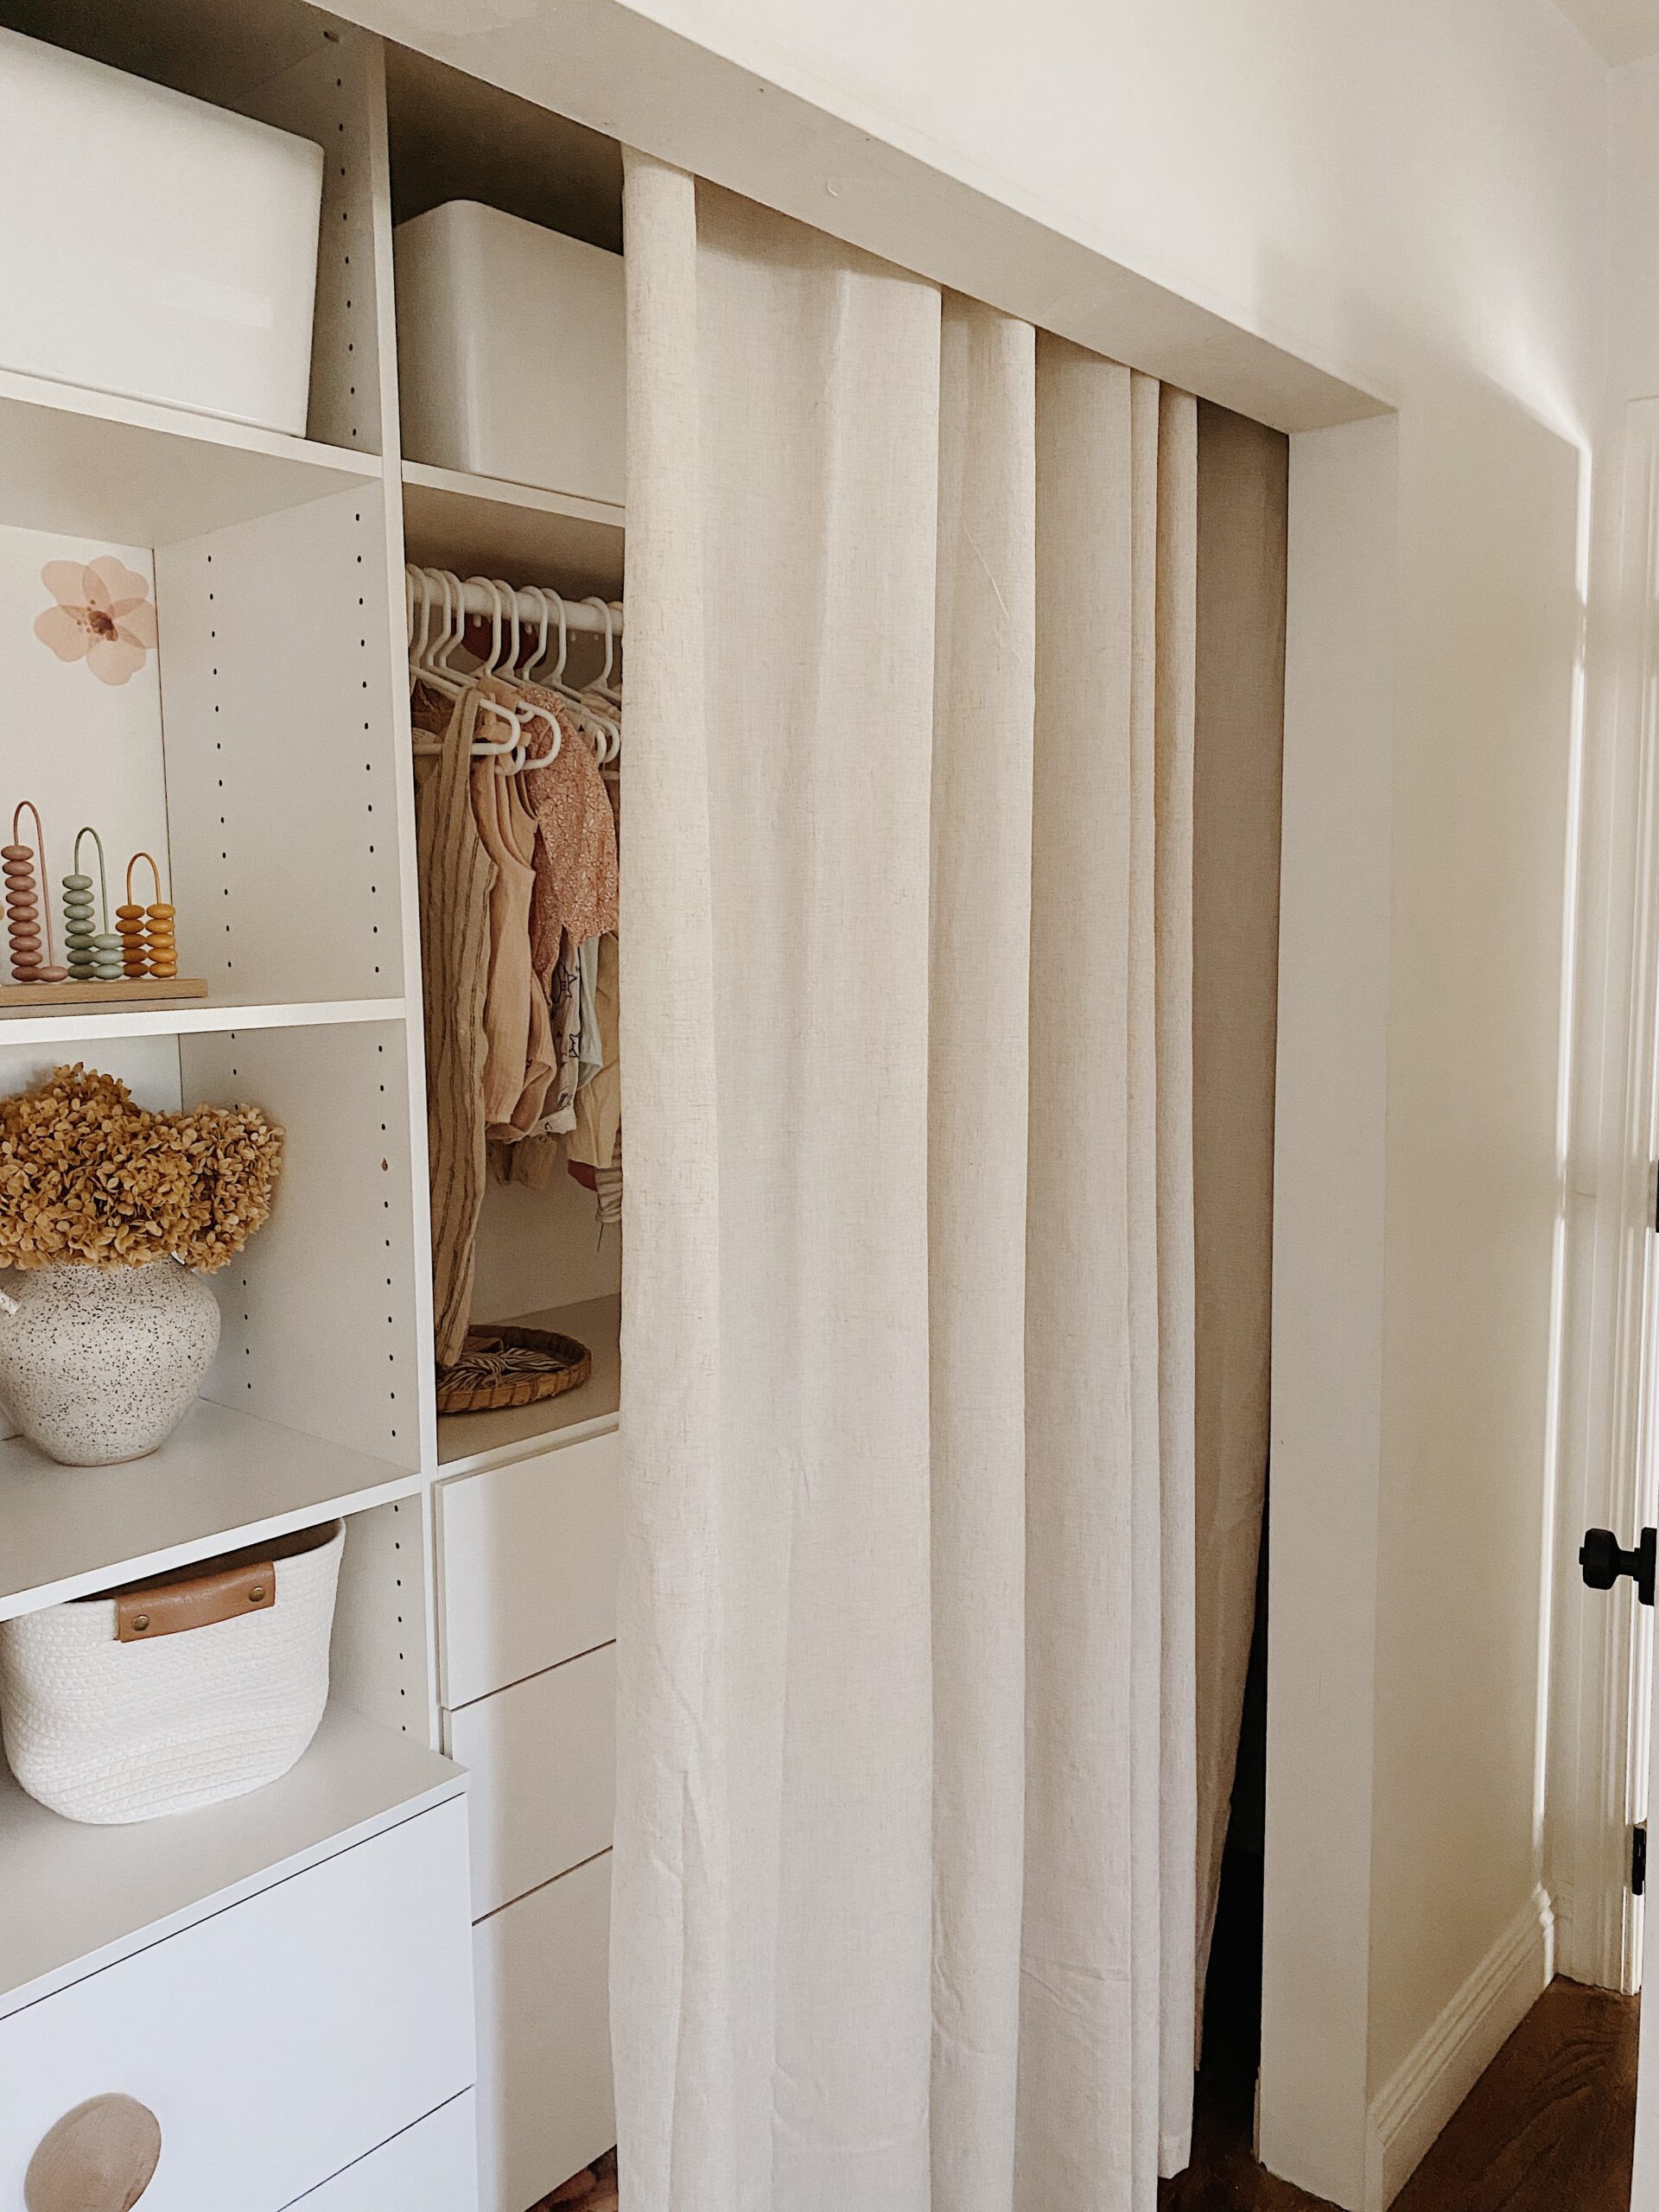 The Nursery Closet: Planned and Organized to the Max! - Kelley Nan